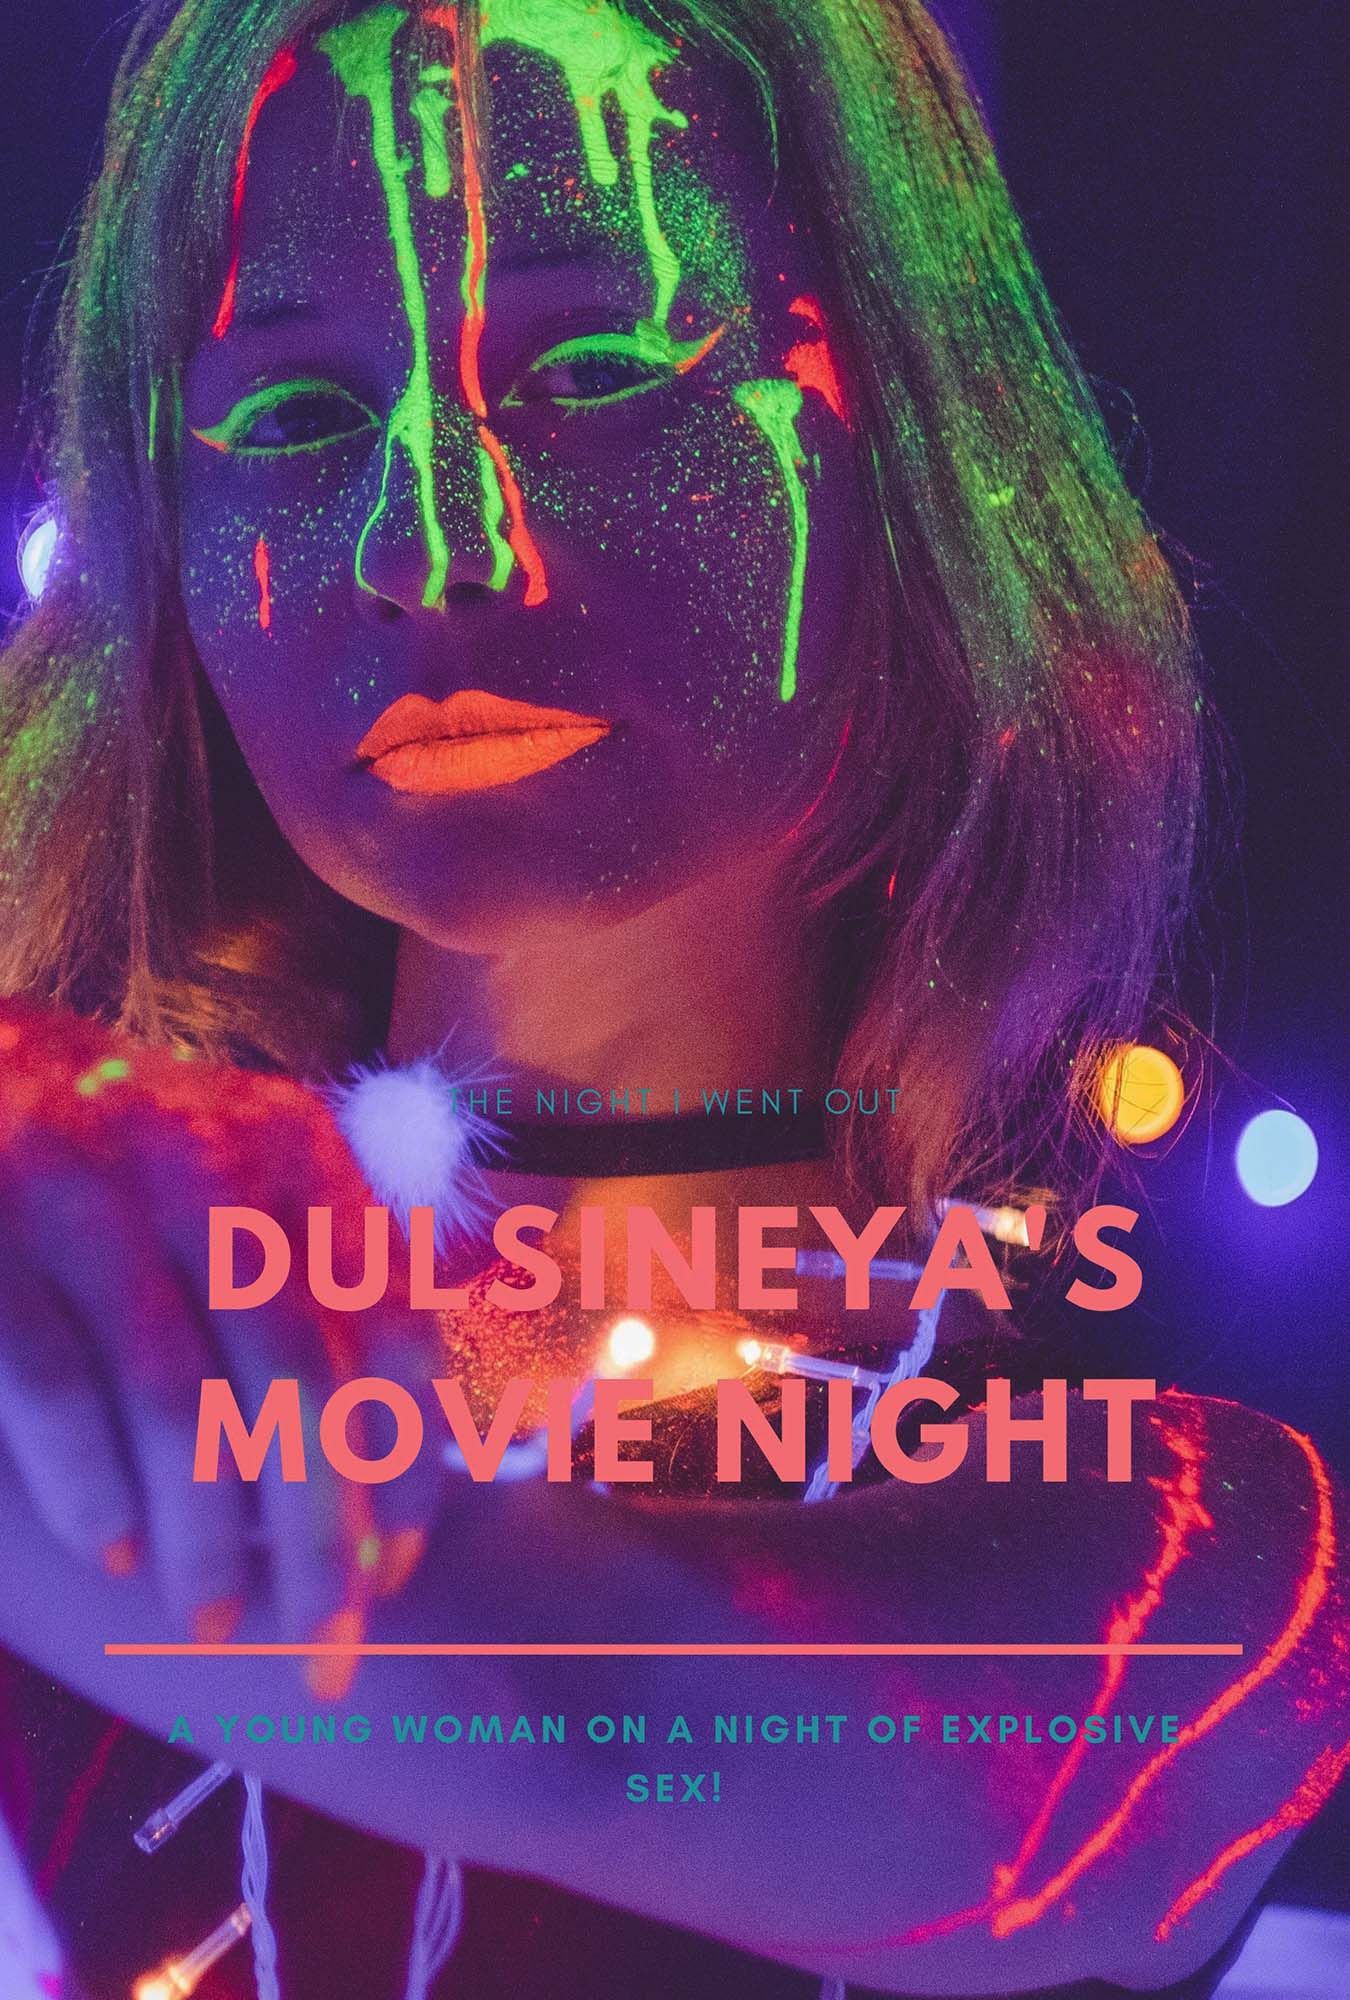 Dulsineya's movie night, a young woman on a night of explosive sex